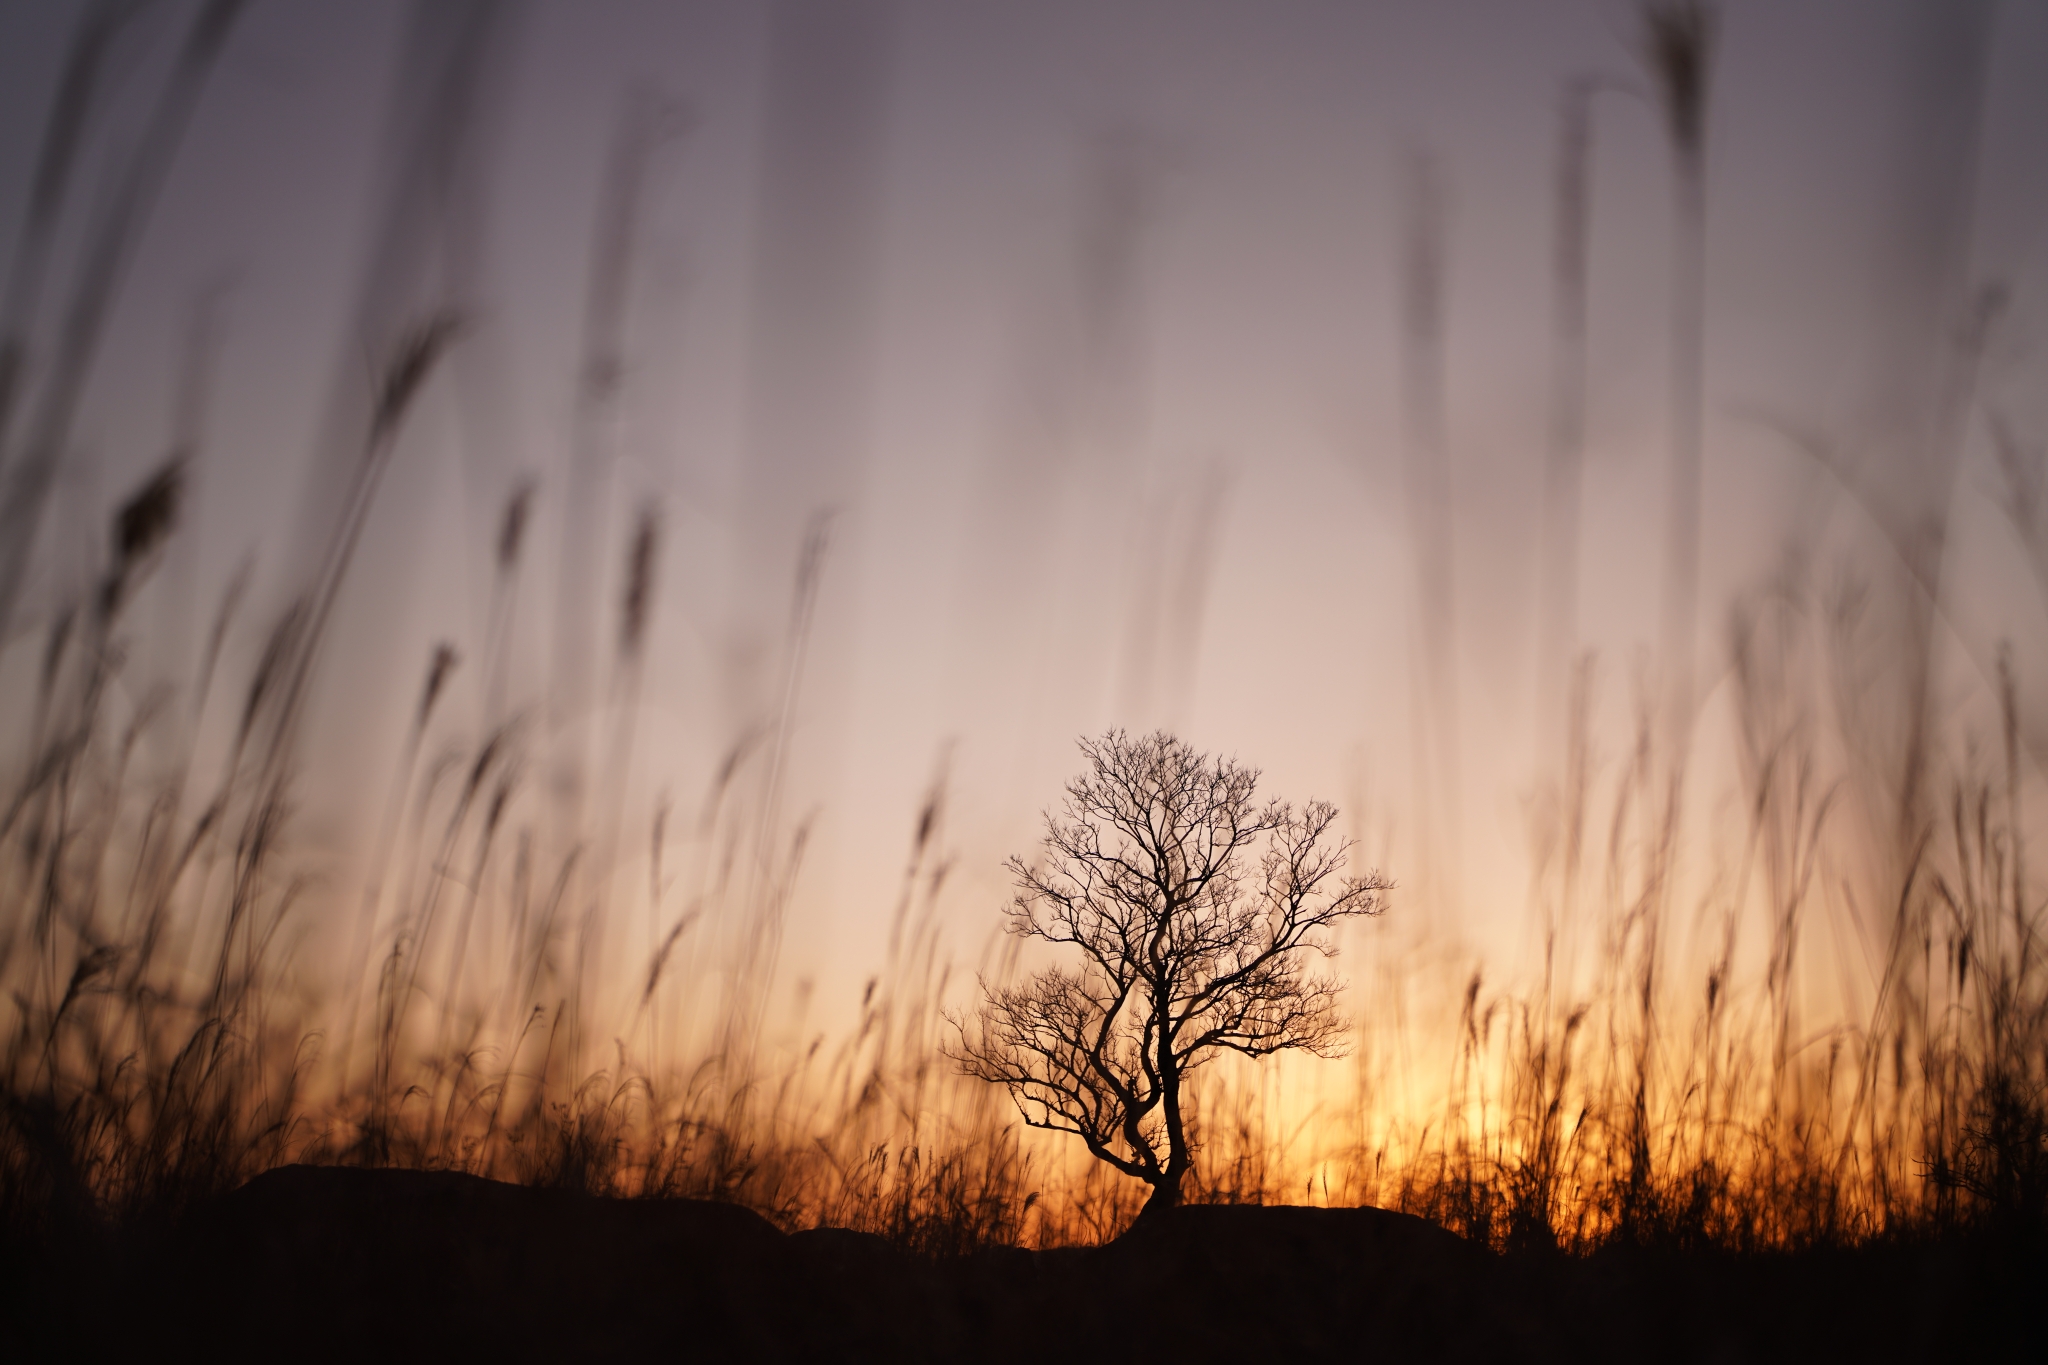 Silhouette of tree and grasses against a sunset sky